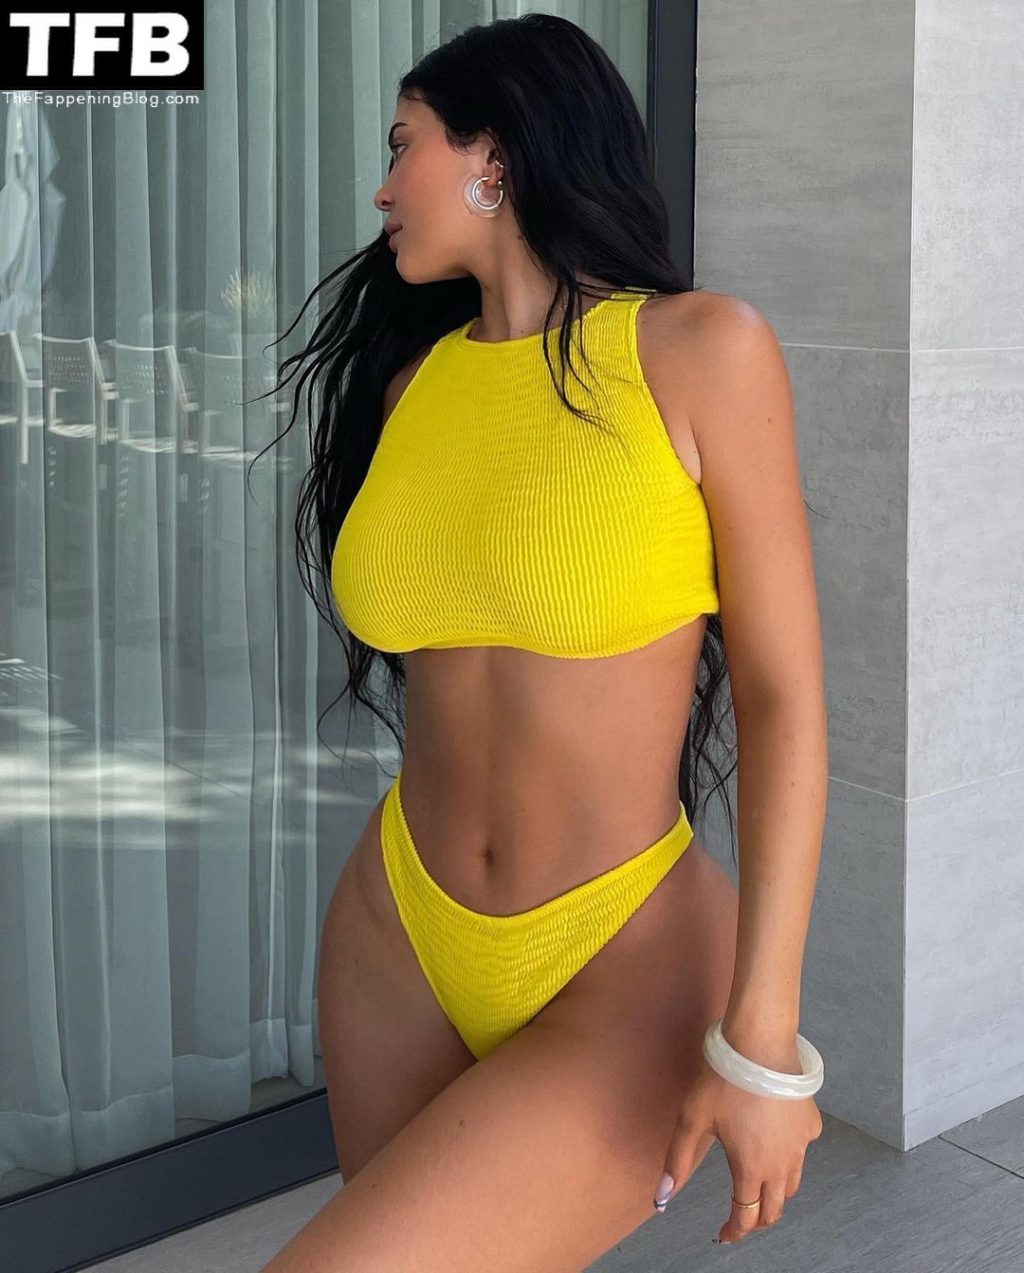 kylie jenner onlyfans 67970 thefappeningblog.com  1024x1273 - Kylie Jenner Sexy Collection (10 Photos)